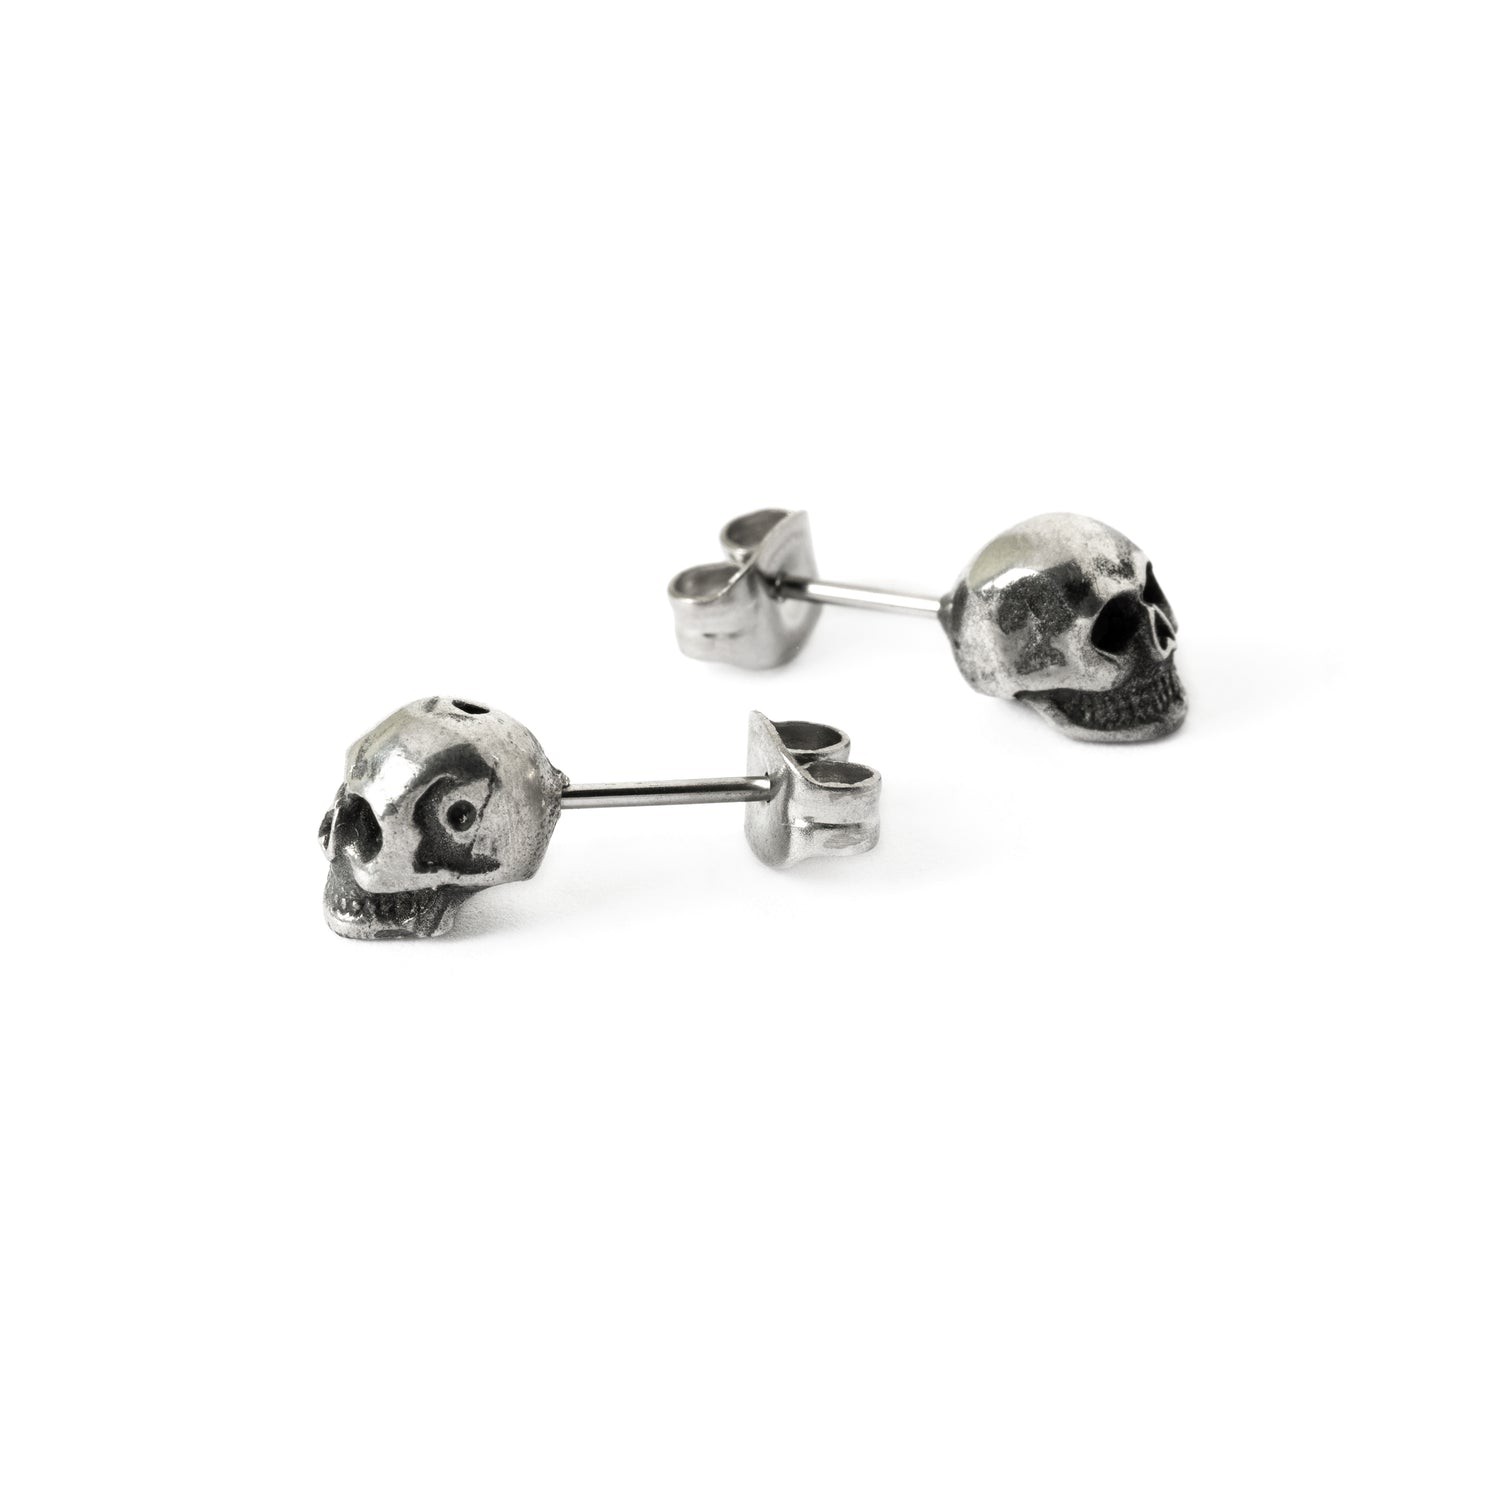 Skull stud earrings left and right side view